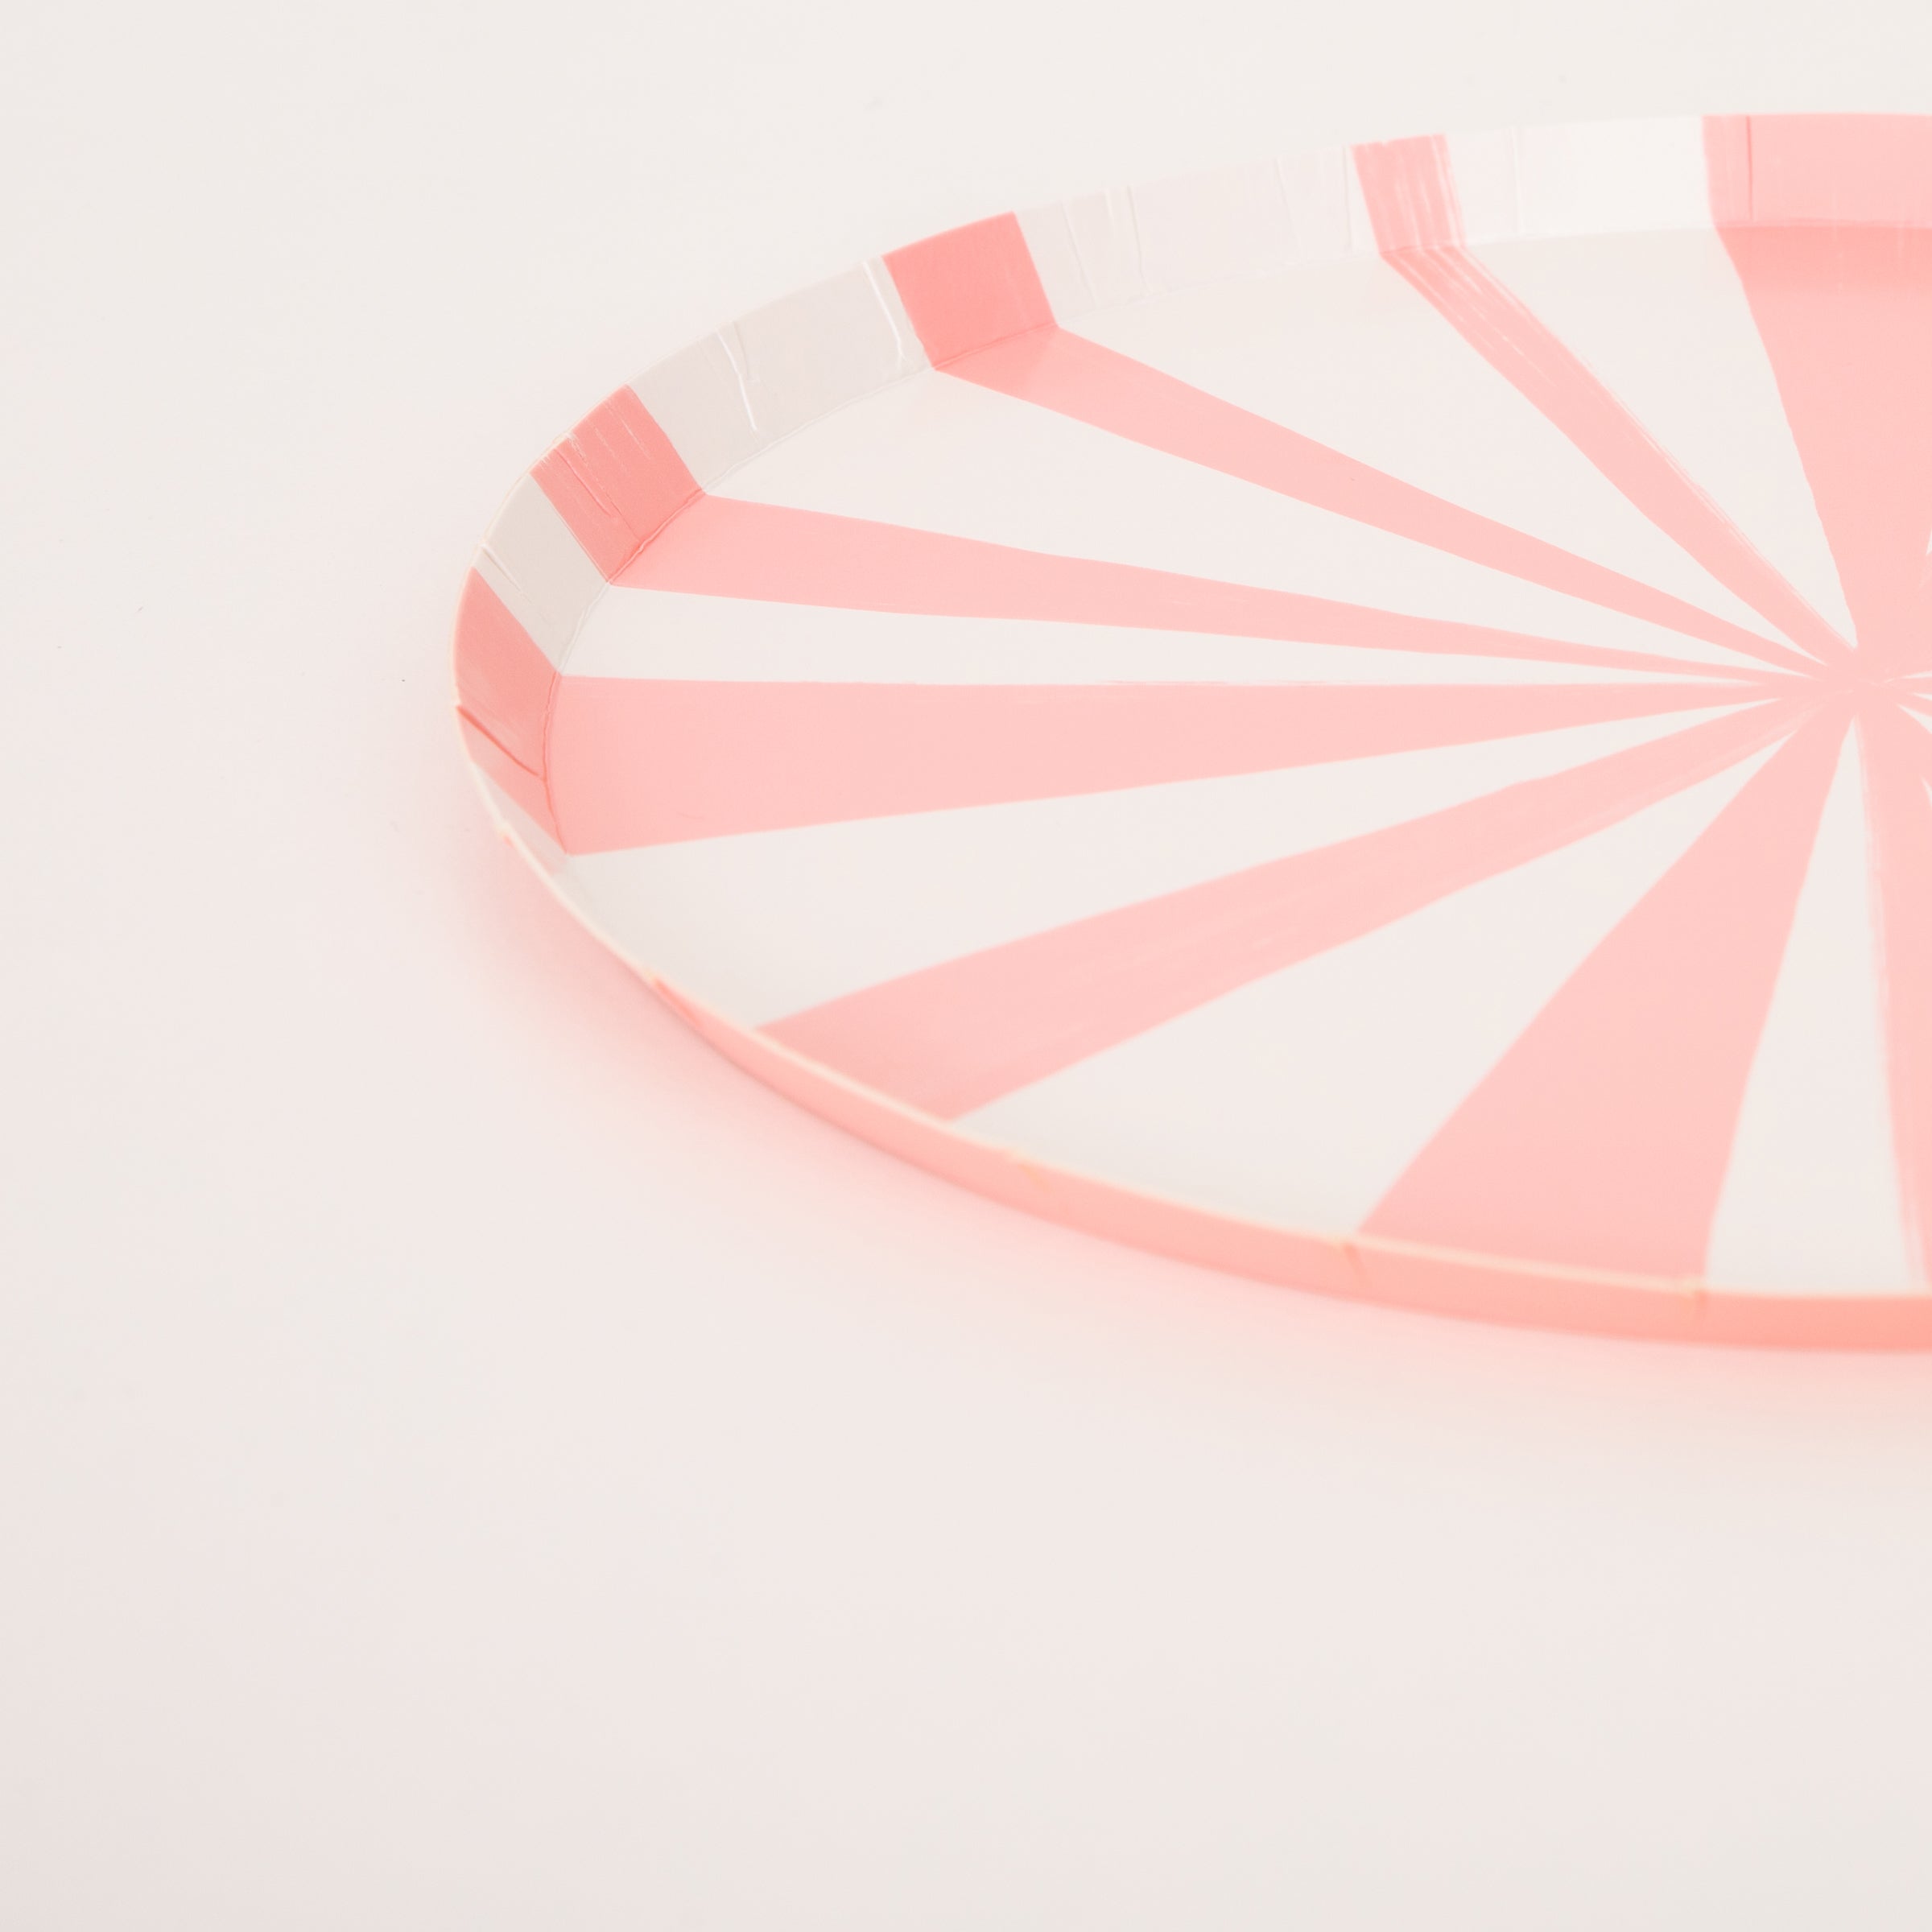 Our small plates, with a pretty pink pink stripe, are ideal as party plates, side plates or cocktail plates.